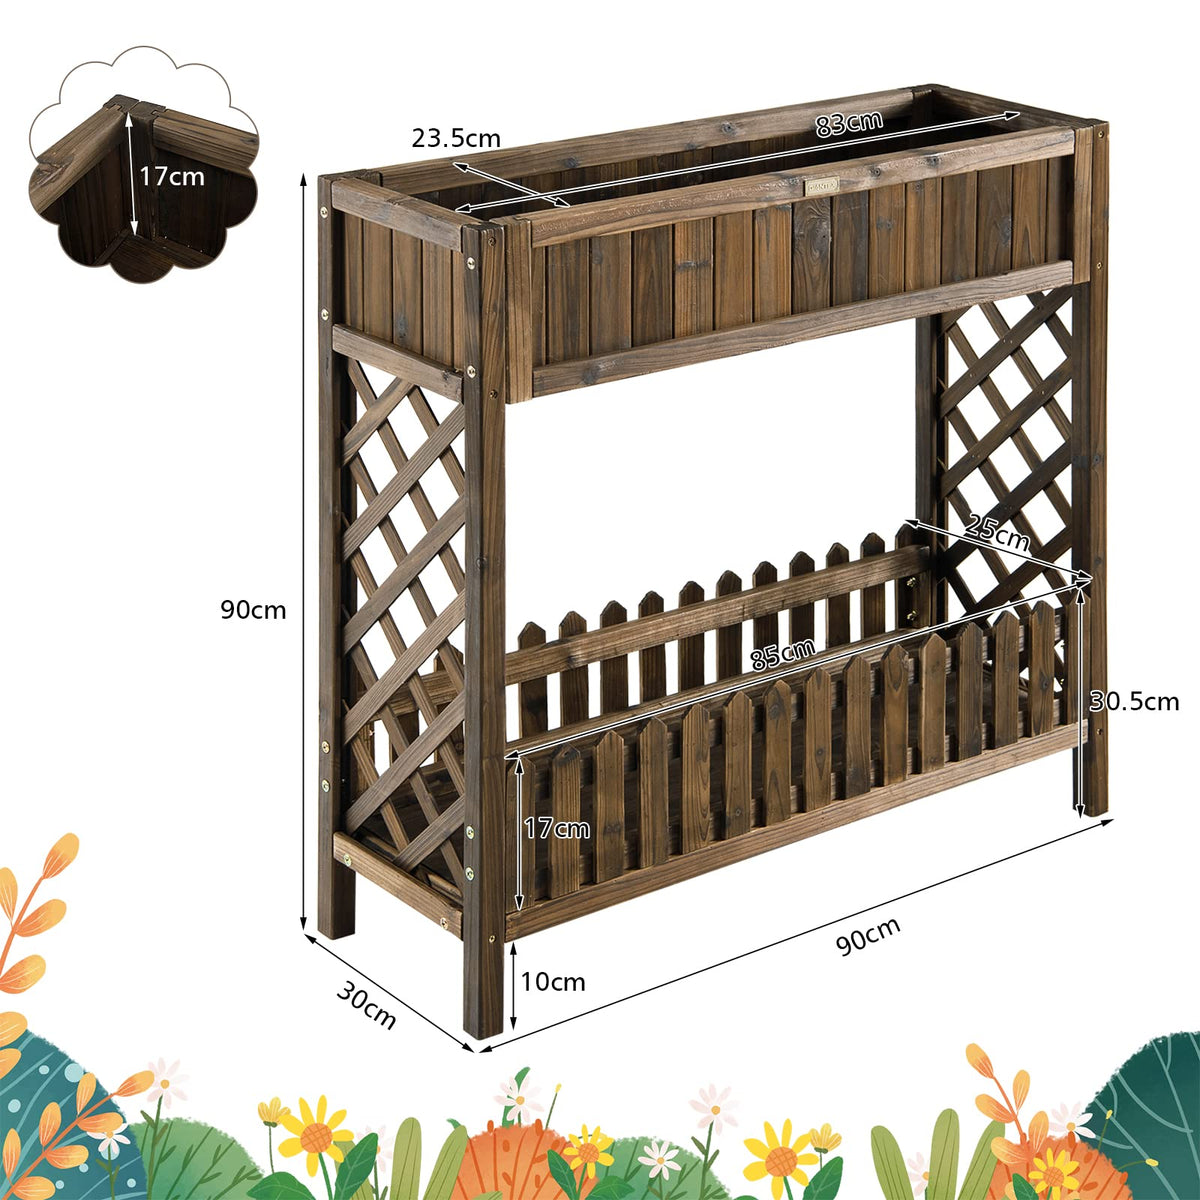 Giantex Wooden Raised Garden Bed, 2-Tier Elevated Planter Box Stand w/Shelf Fence